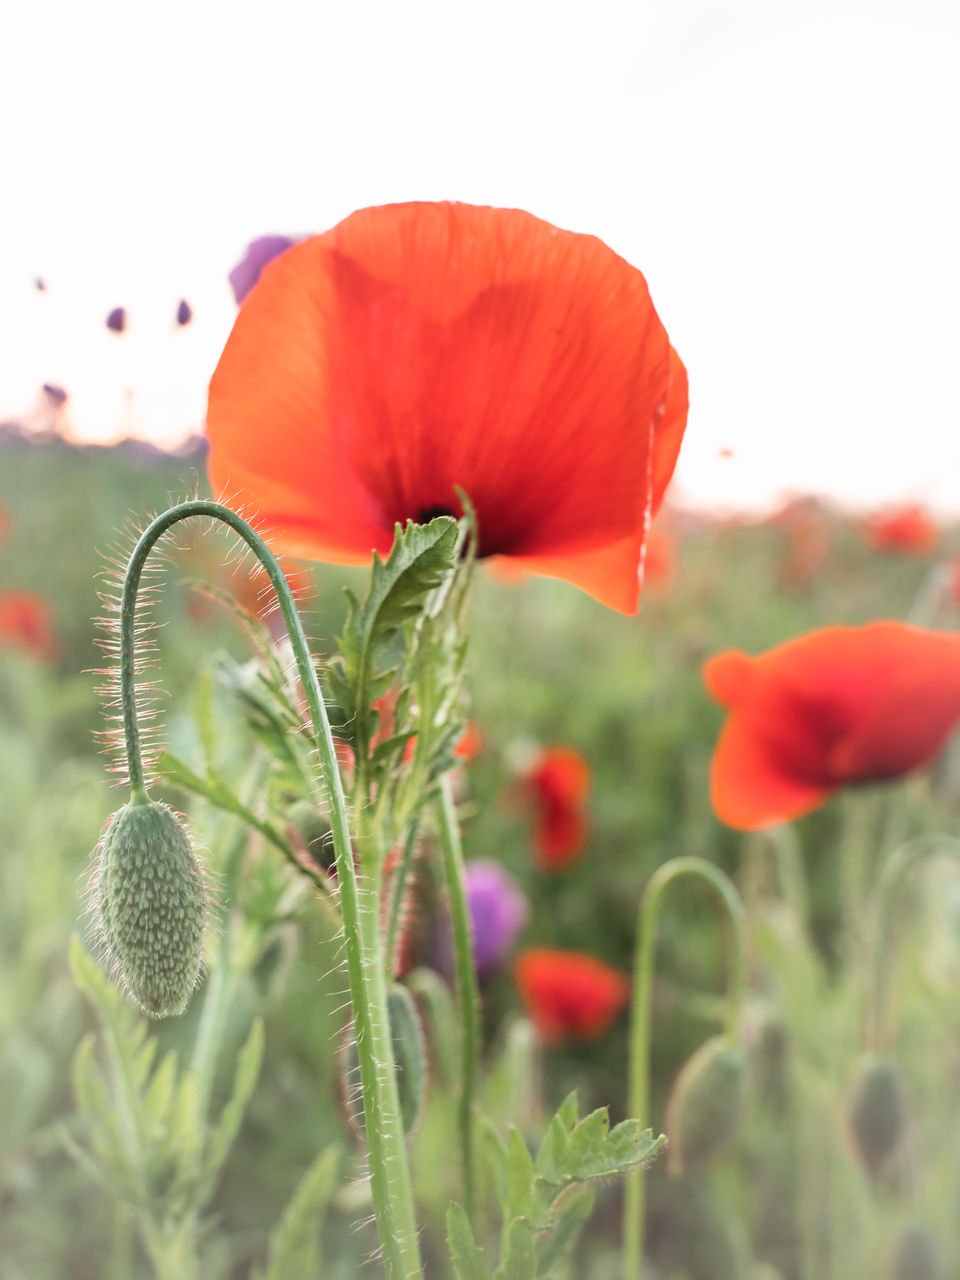 plant, flower, flowering plant, poppy, beauty in nature, freshness, nature, growth, red, field, close-up, flower head, fragility, petal, inflorescence, no people, landscape, sky, land, selective focus, meadow, focus on foreground, environment, outdoors, springtime, plant stem, botany, blossom, agriculture, day, grass, rural scene, wildflower, food, prairie, summer, green